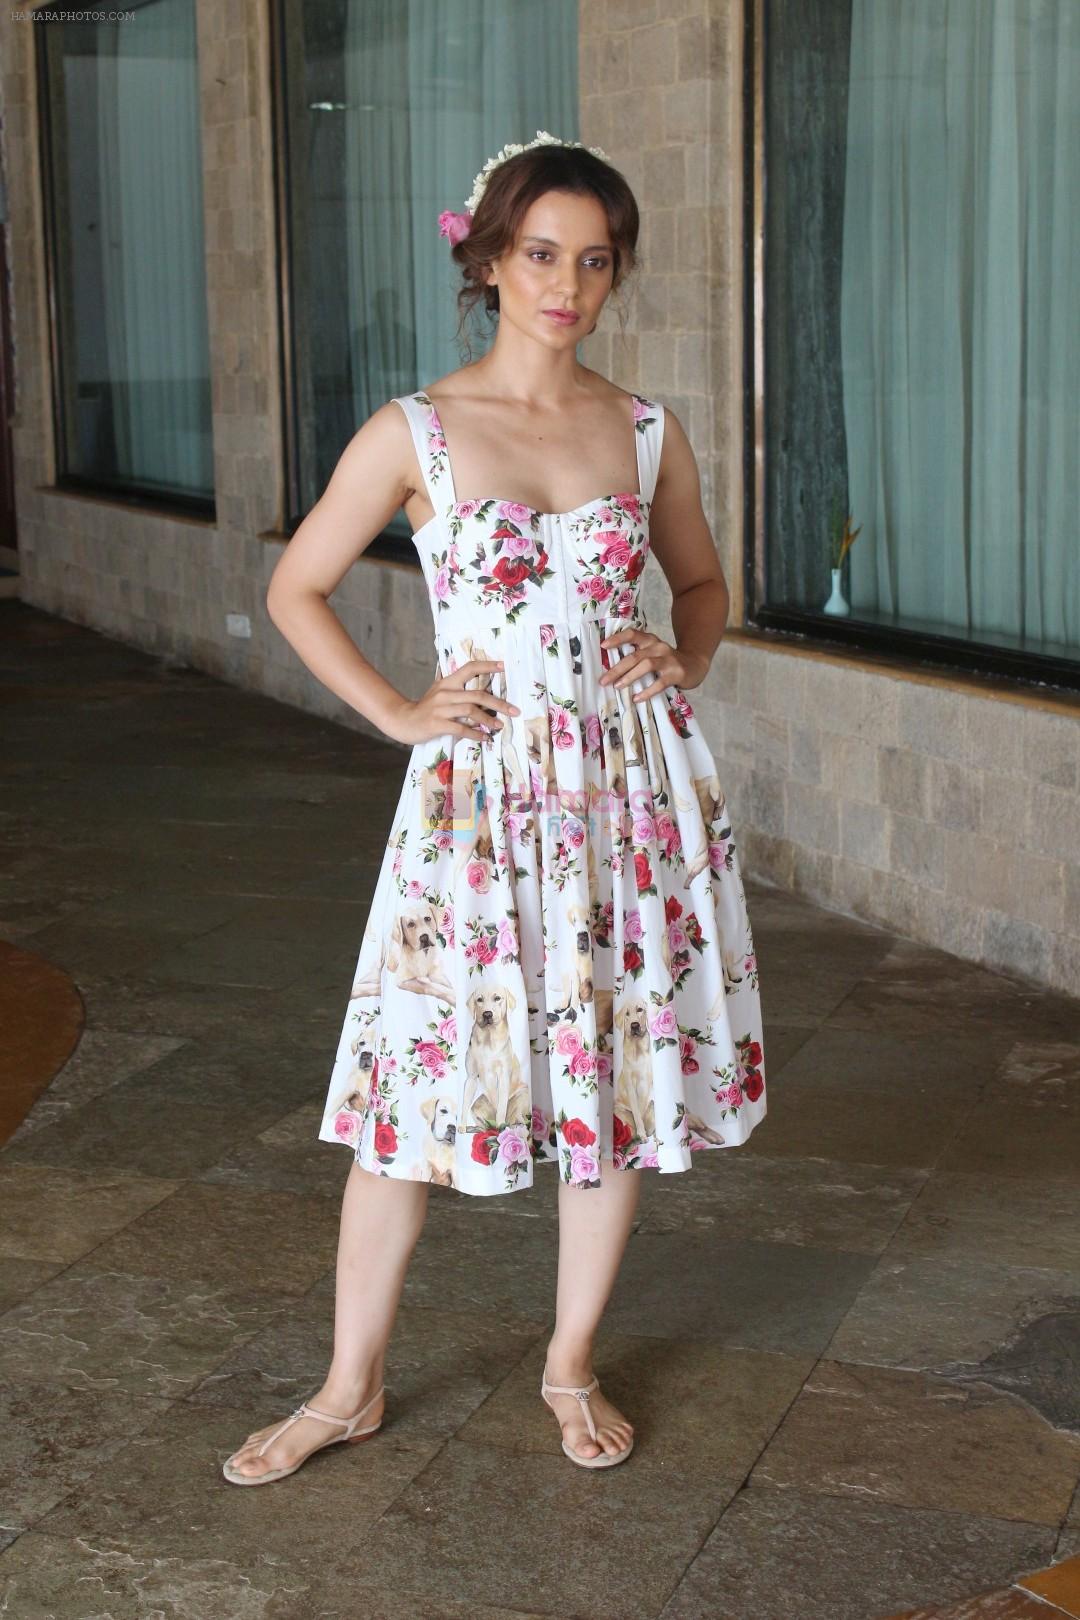 Kangana Ranaut Spotted During Promotional Interview For Film Simran on 9th Sept 2017